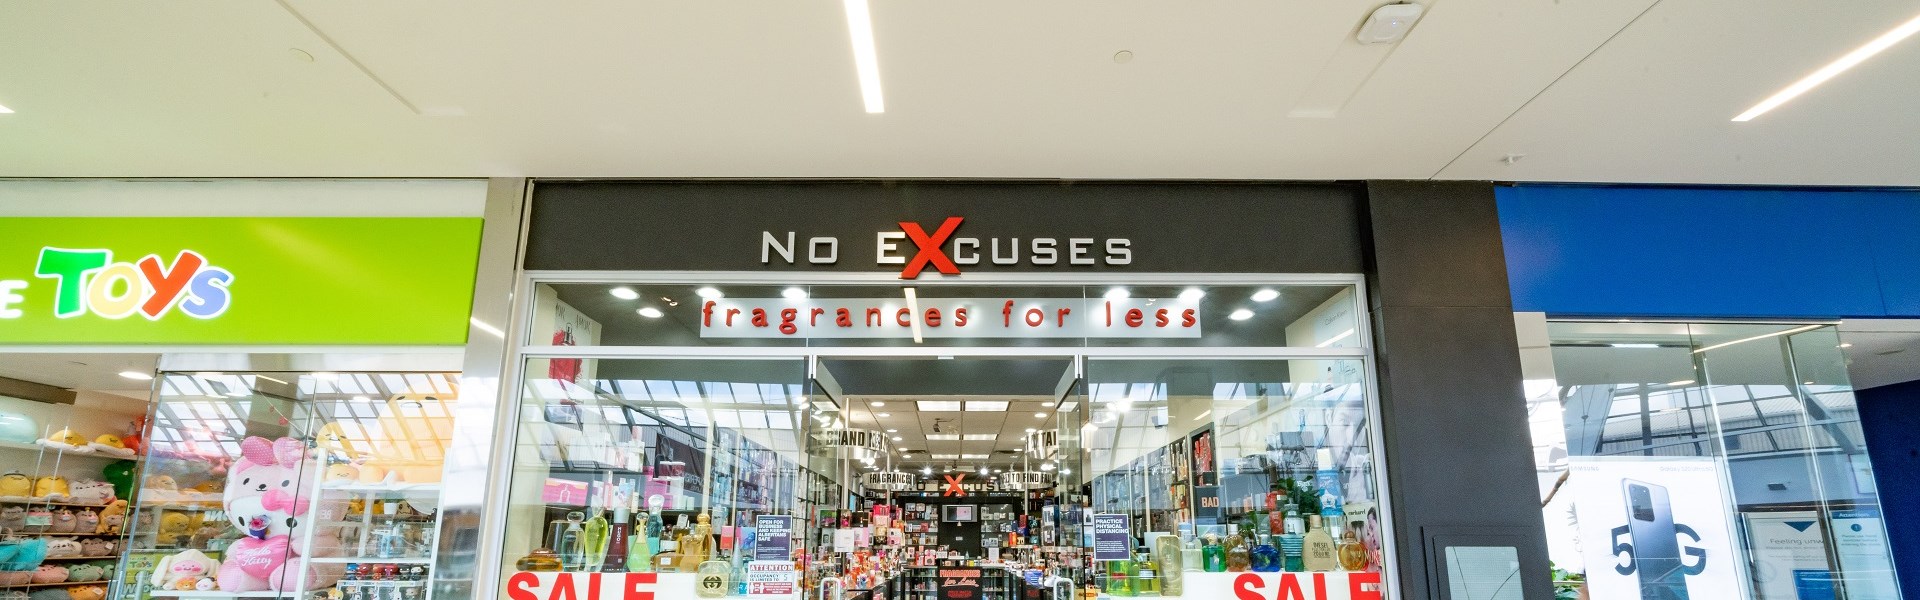 No Excuses - Fragrances for Less